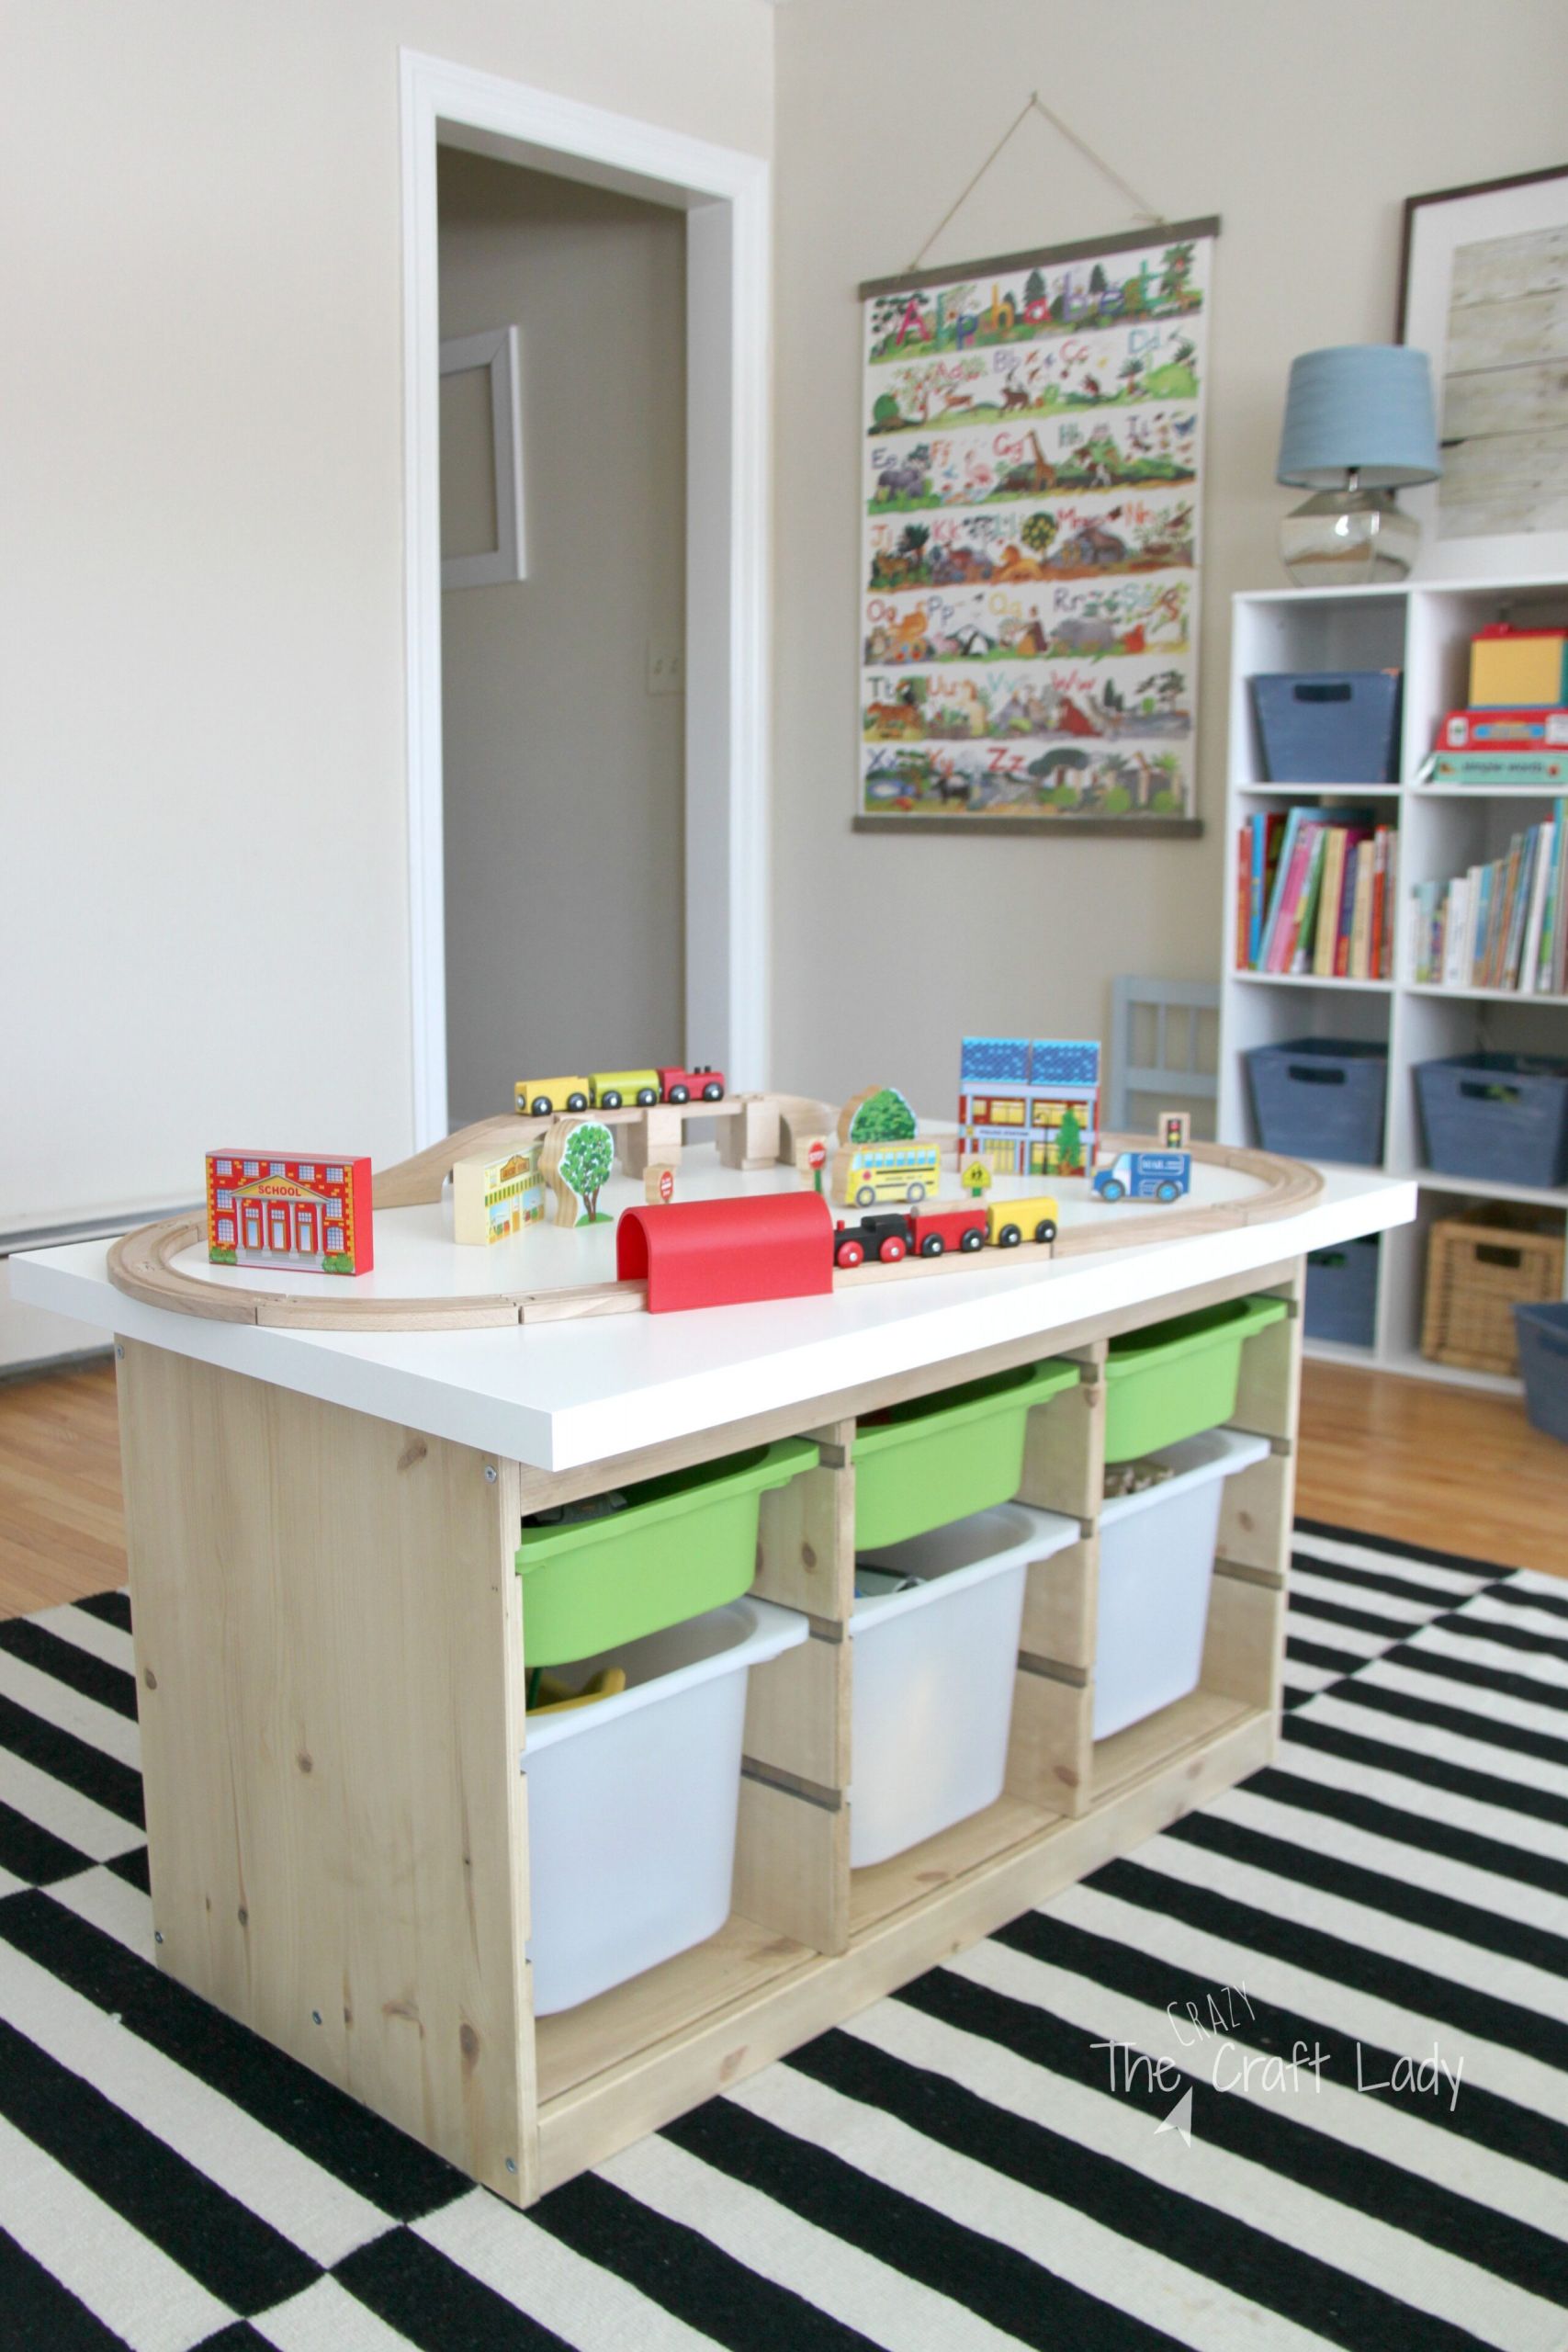 Ikea Childrens Storage
 An Ikea Hack Train & Activity Table The Crazy Craft Lady